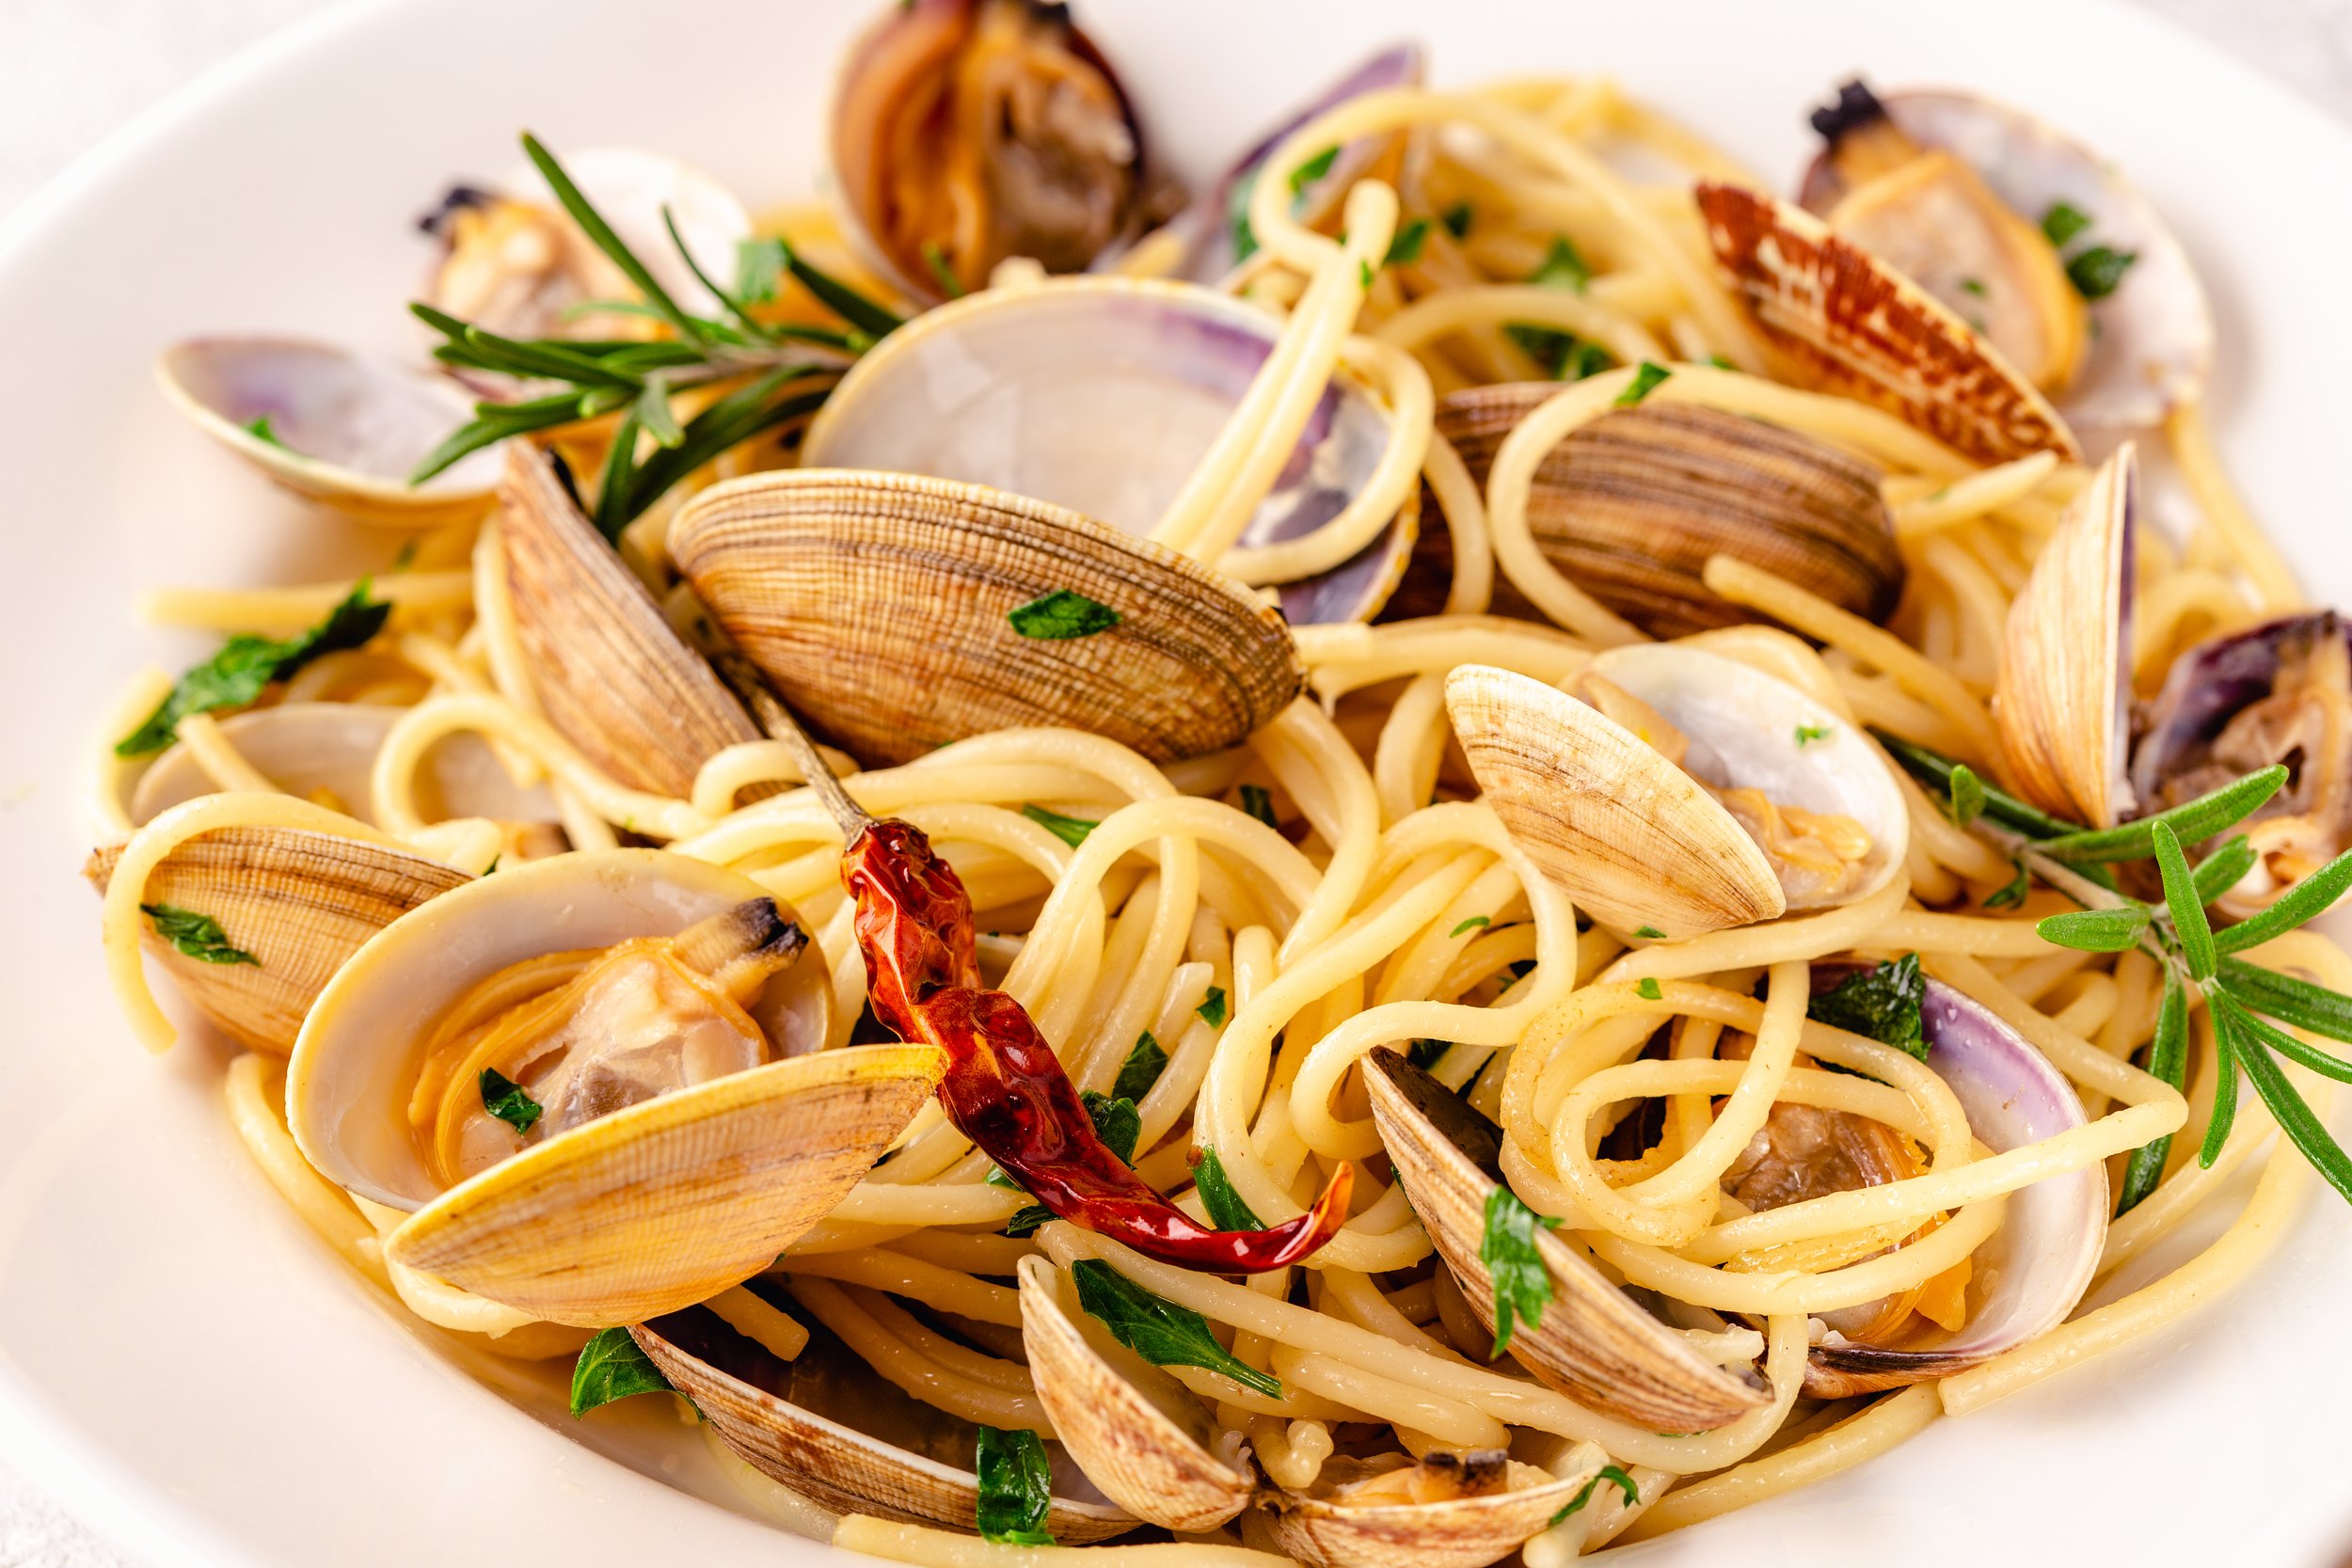 seafood-pasta-with-clams-spaghetti-alle-vongole-on-2021-12-09-14-41-06-utc.jpg